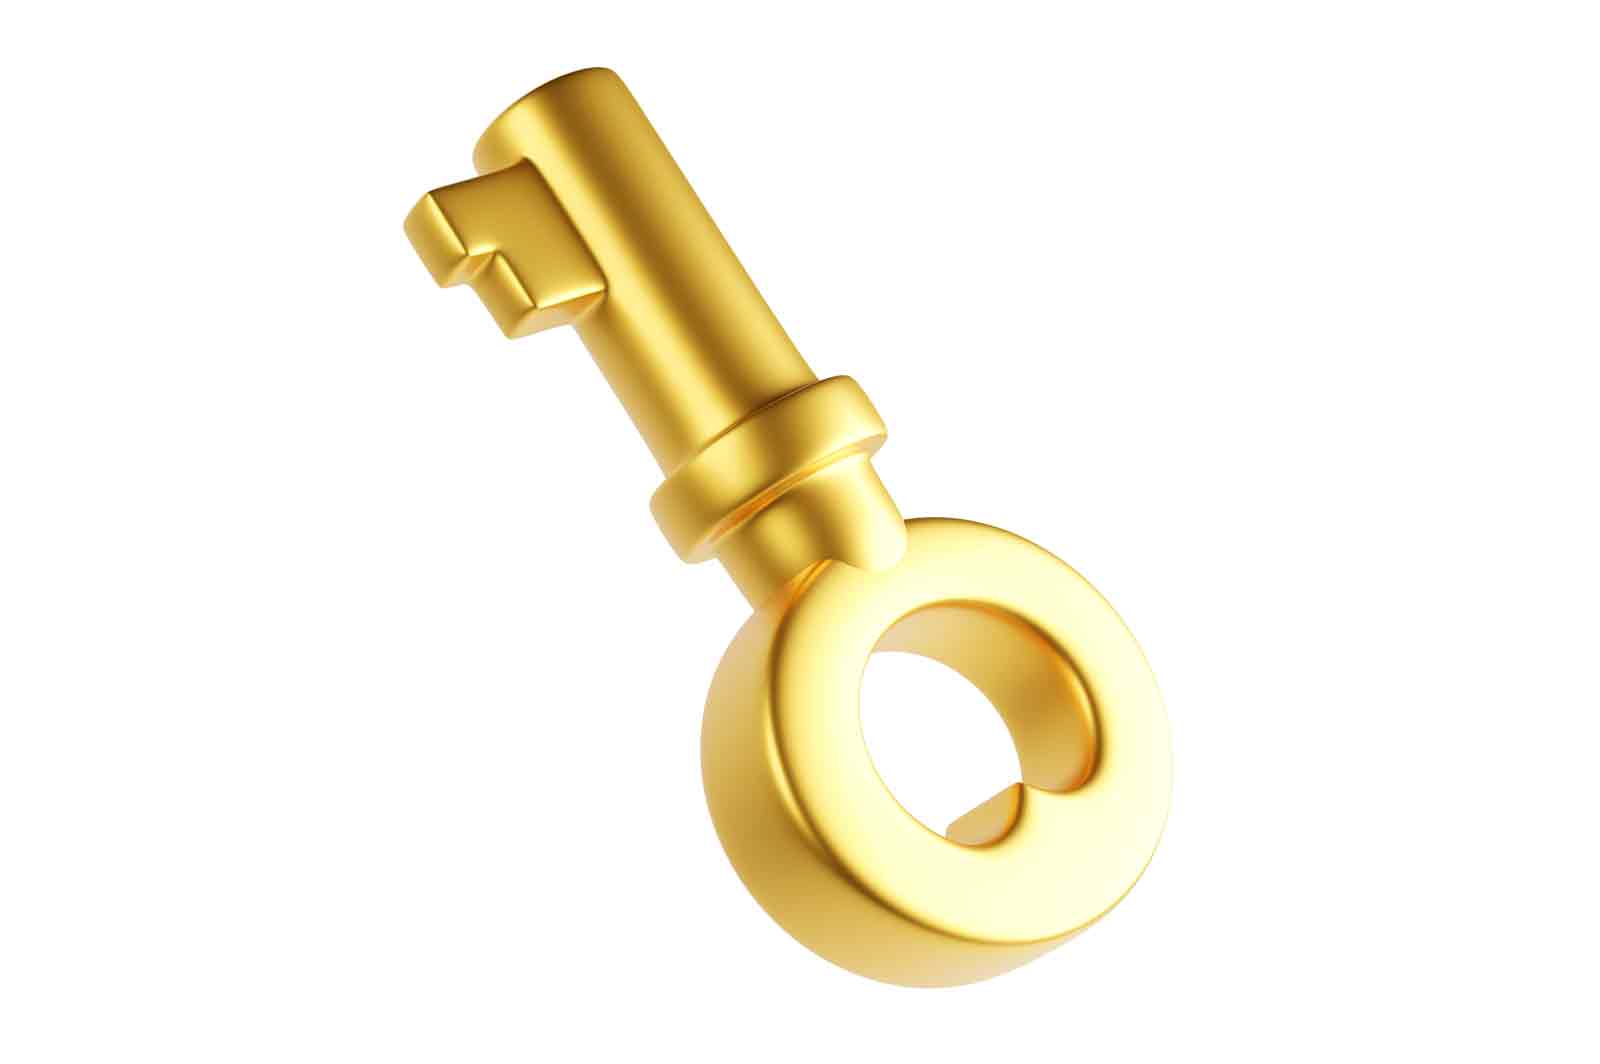 Gold key, 3d rendered illustration. Symbol of access, opportunity, or solution.